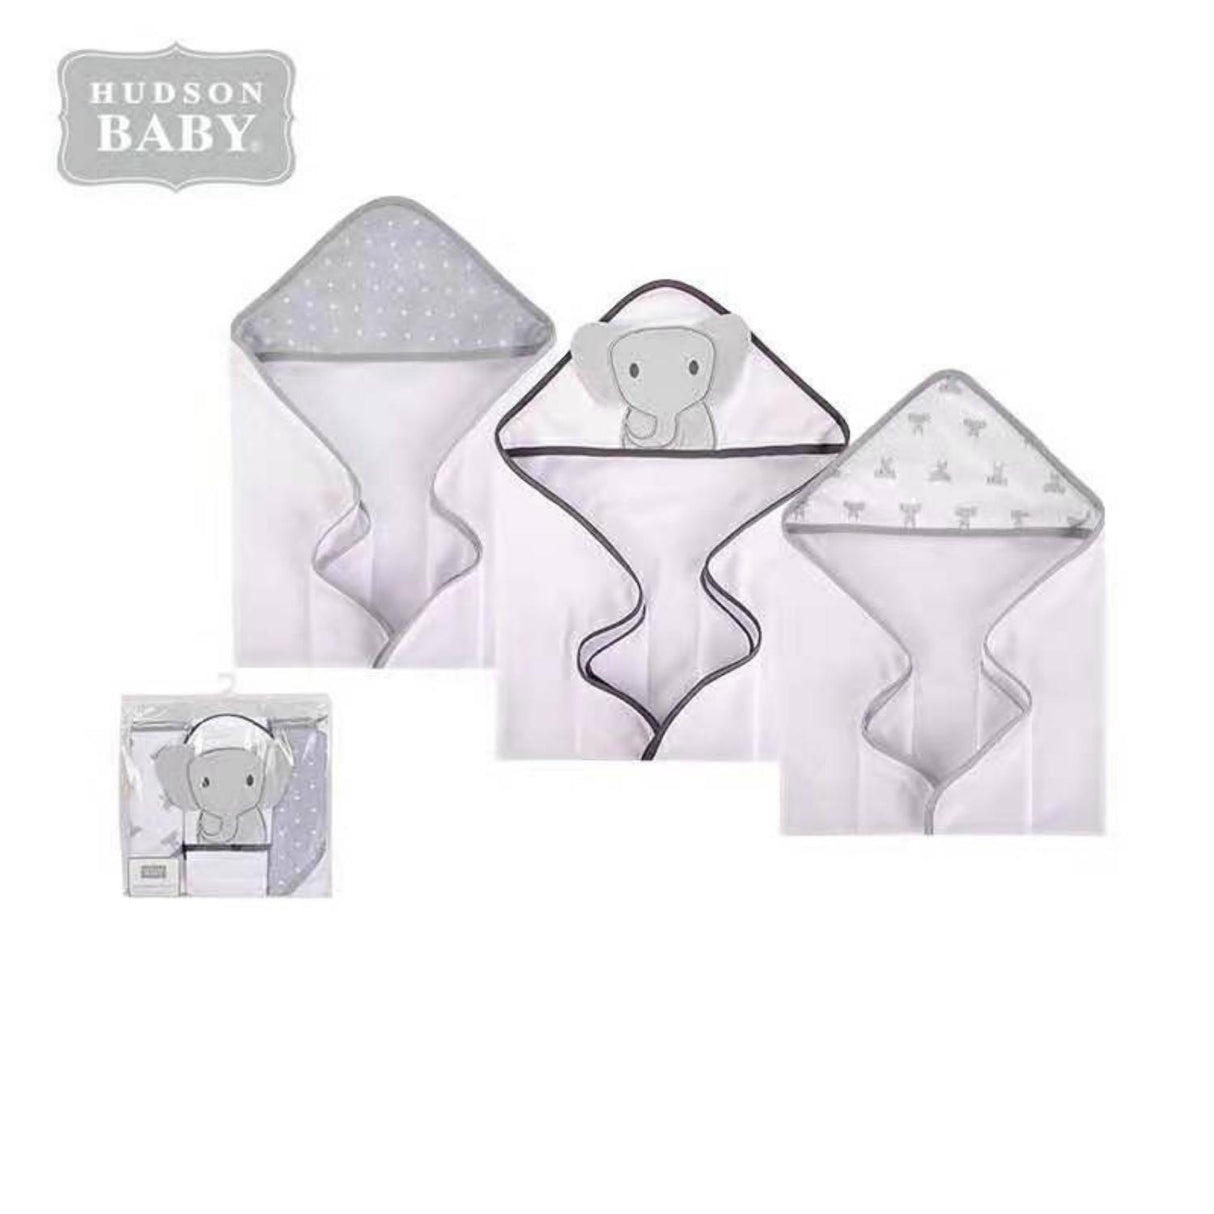 Hudson Baby Comfy Pack Of 3 Hooded Towel